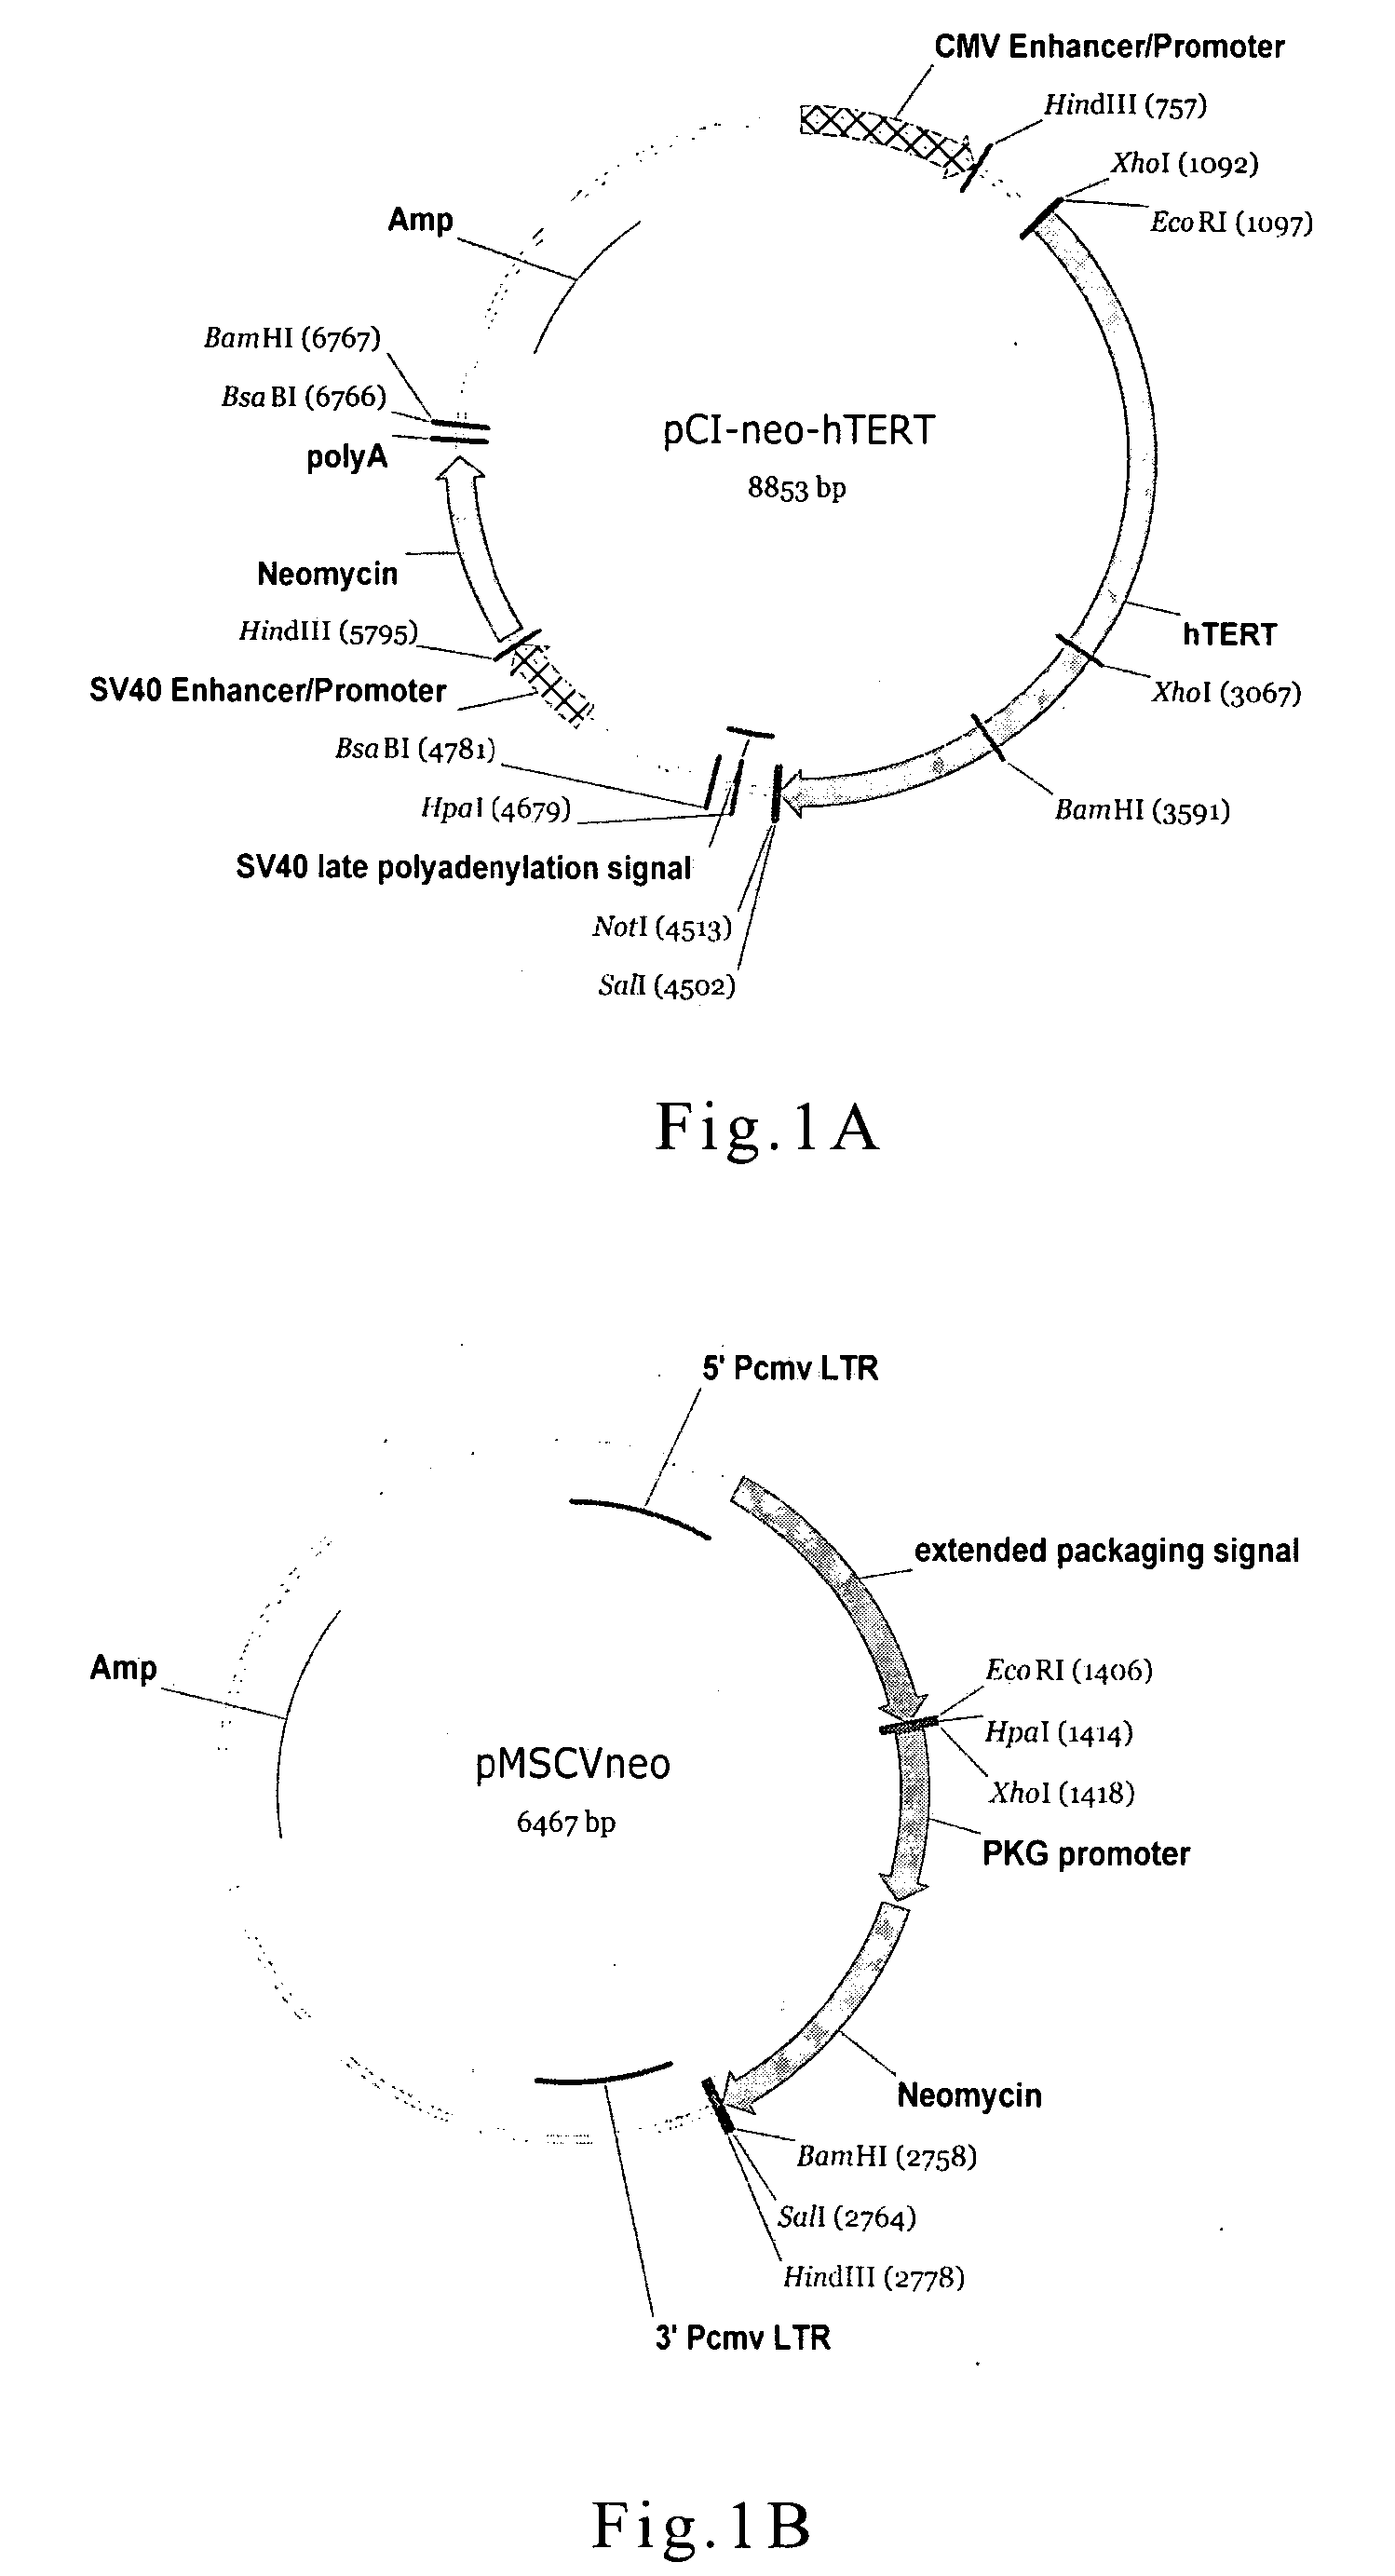 Cell culture and method for screening for a compound useful in the treatment or prevention of hepatic cirrhosis